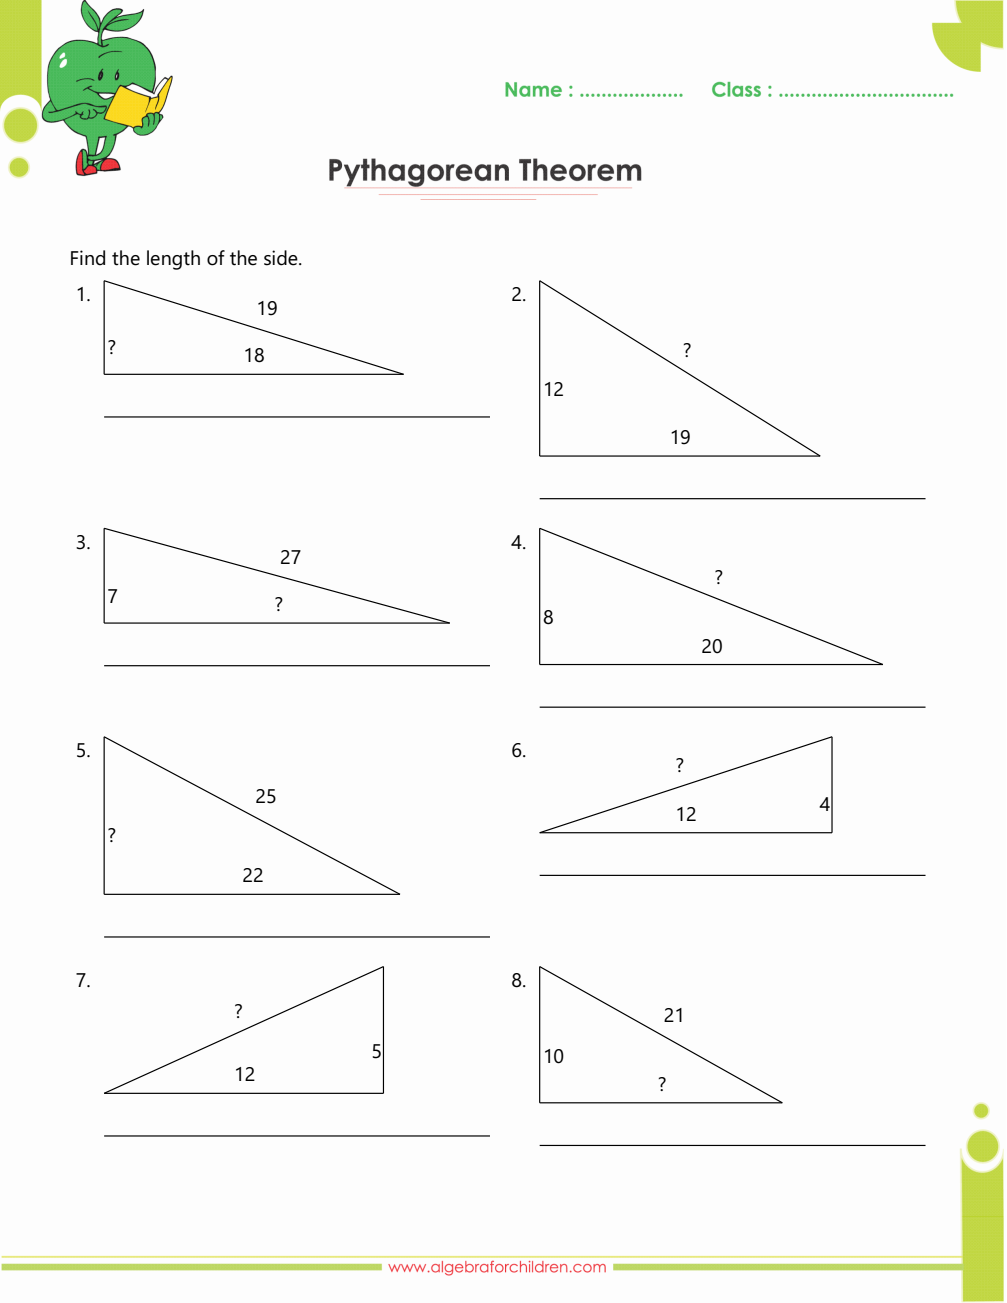 Multi-step trigonometry problems worksheets with answers pdf, Searches related to trigonometry problems with answers, trigonometry problems with solutions pdf, basic trigonometry questions and answers, trigonometry problems for class 10, pythagorean theorem worksheets with answer key pdf, pythagorean theorem word problems, pythagorean theorem worksheet pdf, pythagorean theorem worksheet with answers, pythagorean theorem word problems worksheet, pythagorean theorem worksheets grade 9 pdf, pythagorean theorem worksheets grade 8 pdf, pythagorean theorem worksheets with answers grade 10, pythagorean theorem worksheet grade 7 pdf,  pythagorean theorem worksheet grade 8 with answers